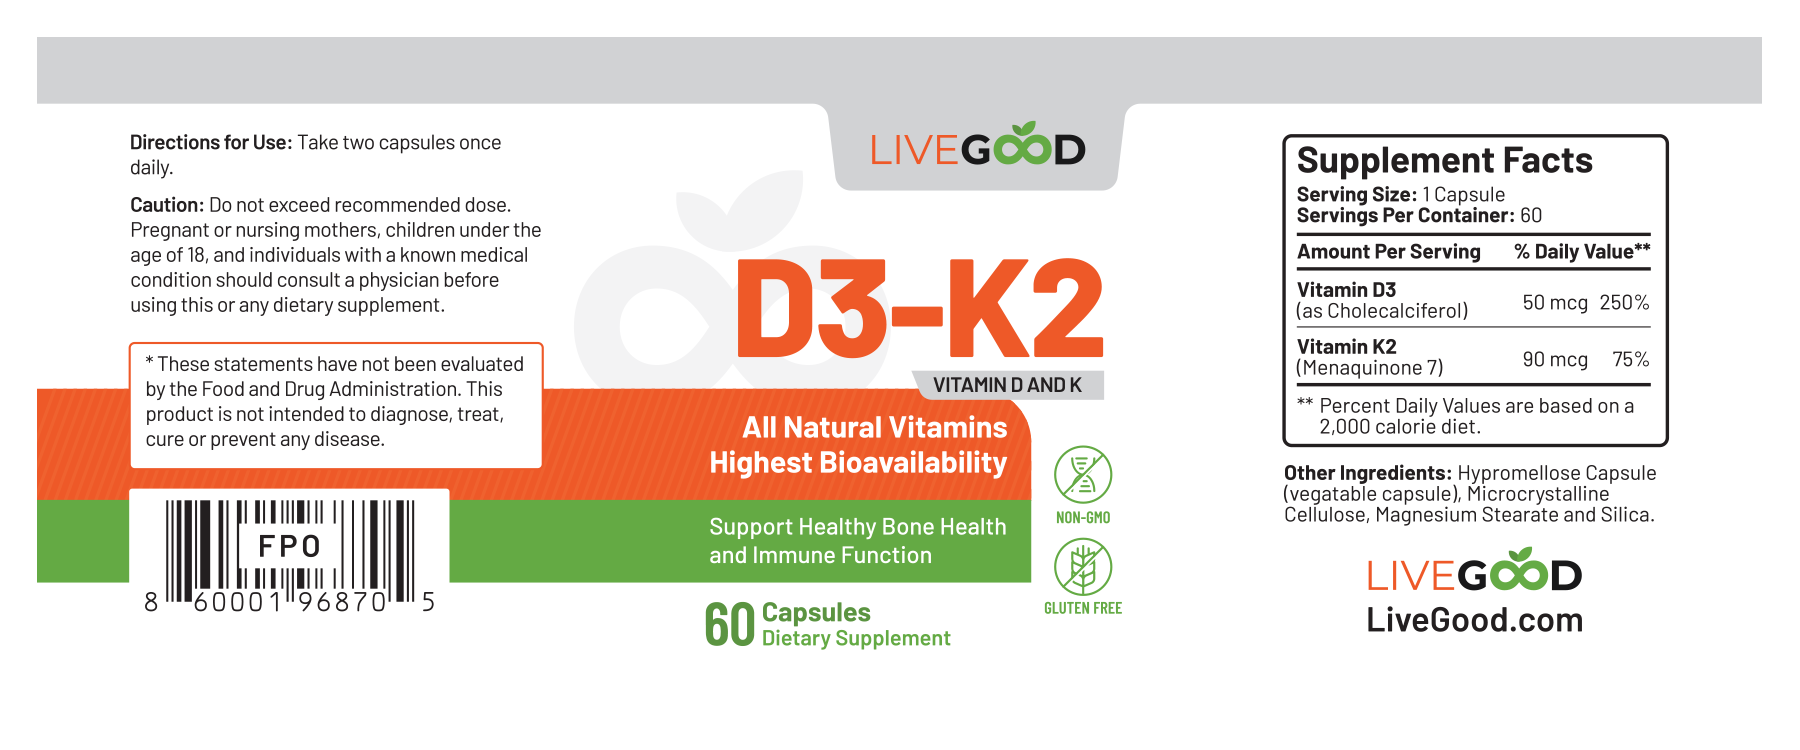 Vitamin D3 and K2